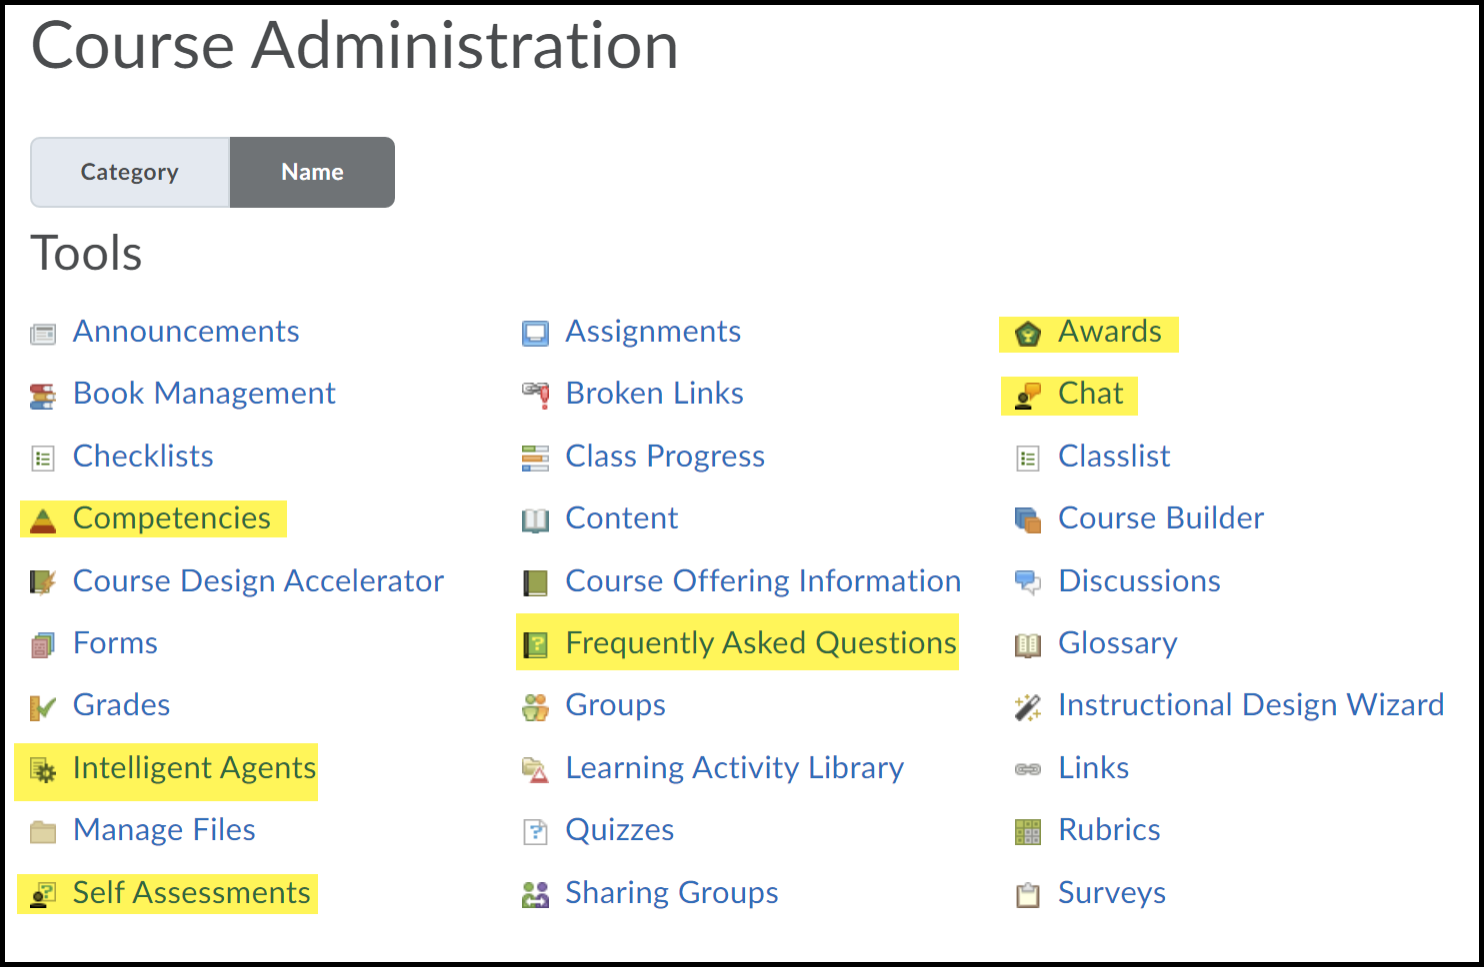 The remaining tools highlighted are Competencies, Intelligent Agents, Self Assessments, FAQ's, Awards and Chat.